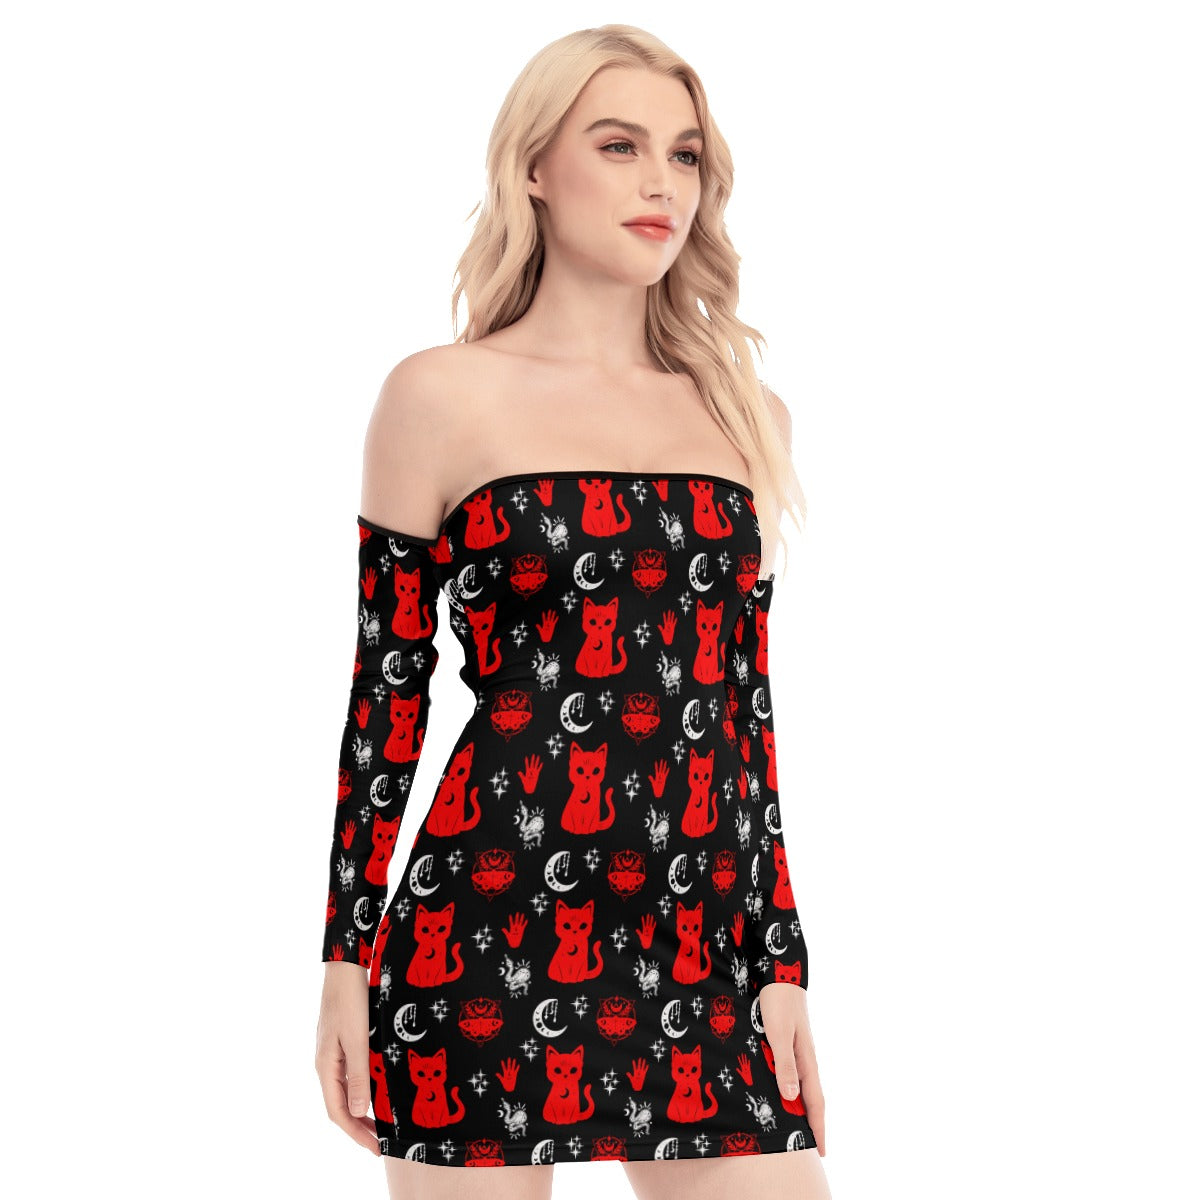 All-Over Print Women's Off-shoulder Back Lace-up Dress spookydoll